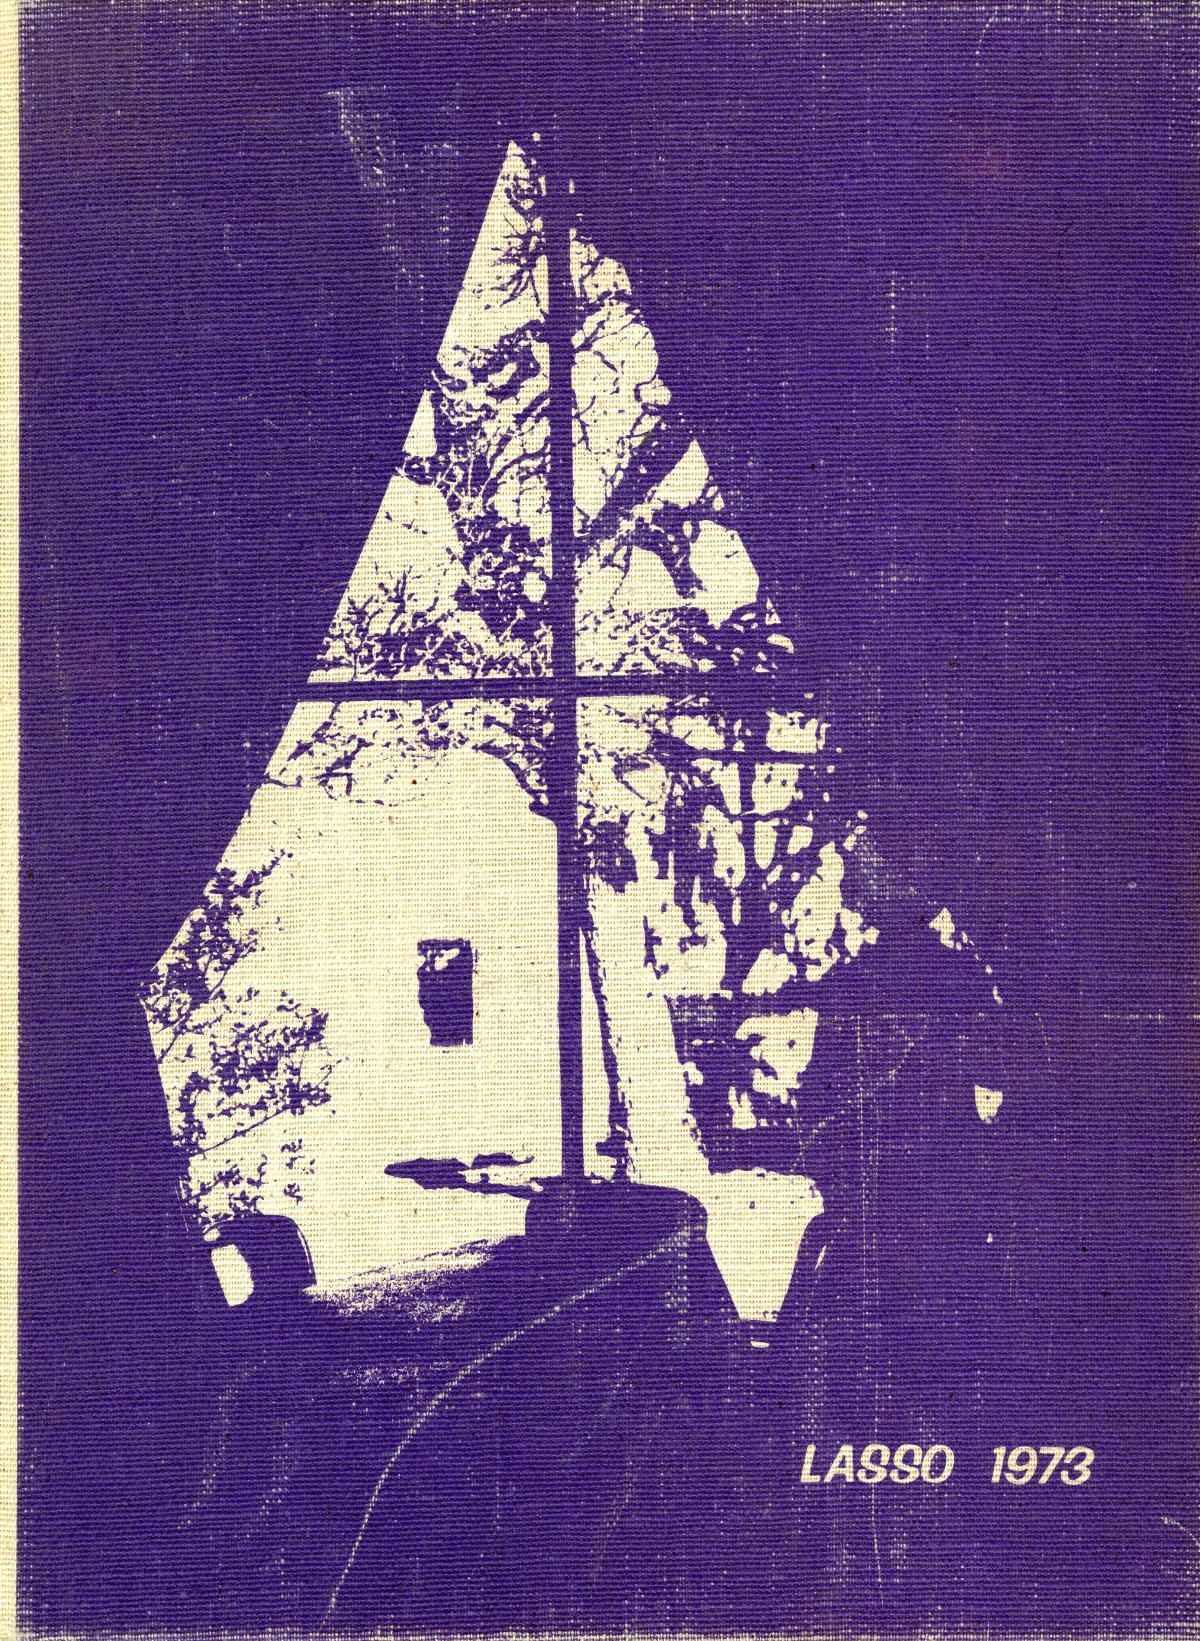 The Lasso, Yearbook of Howard Payne College, 1973
                                                
                                                    Front Cover
                                                